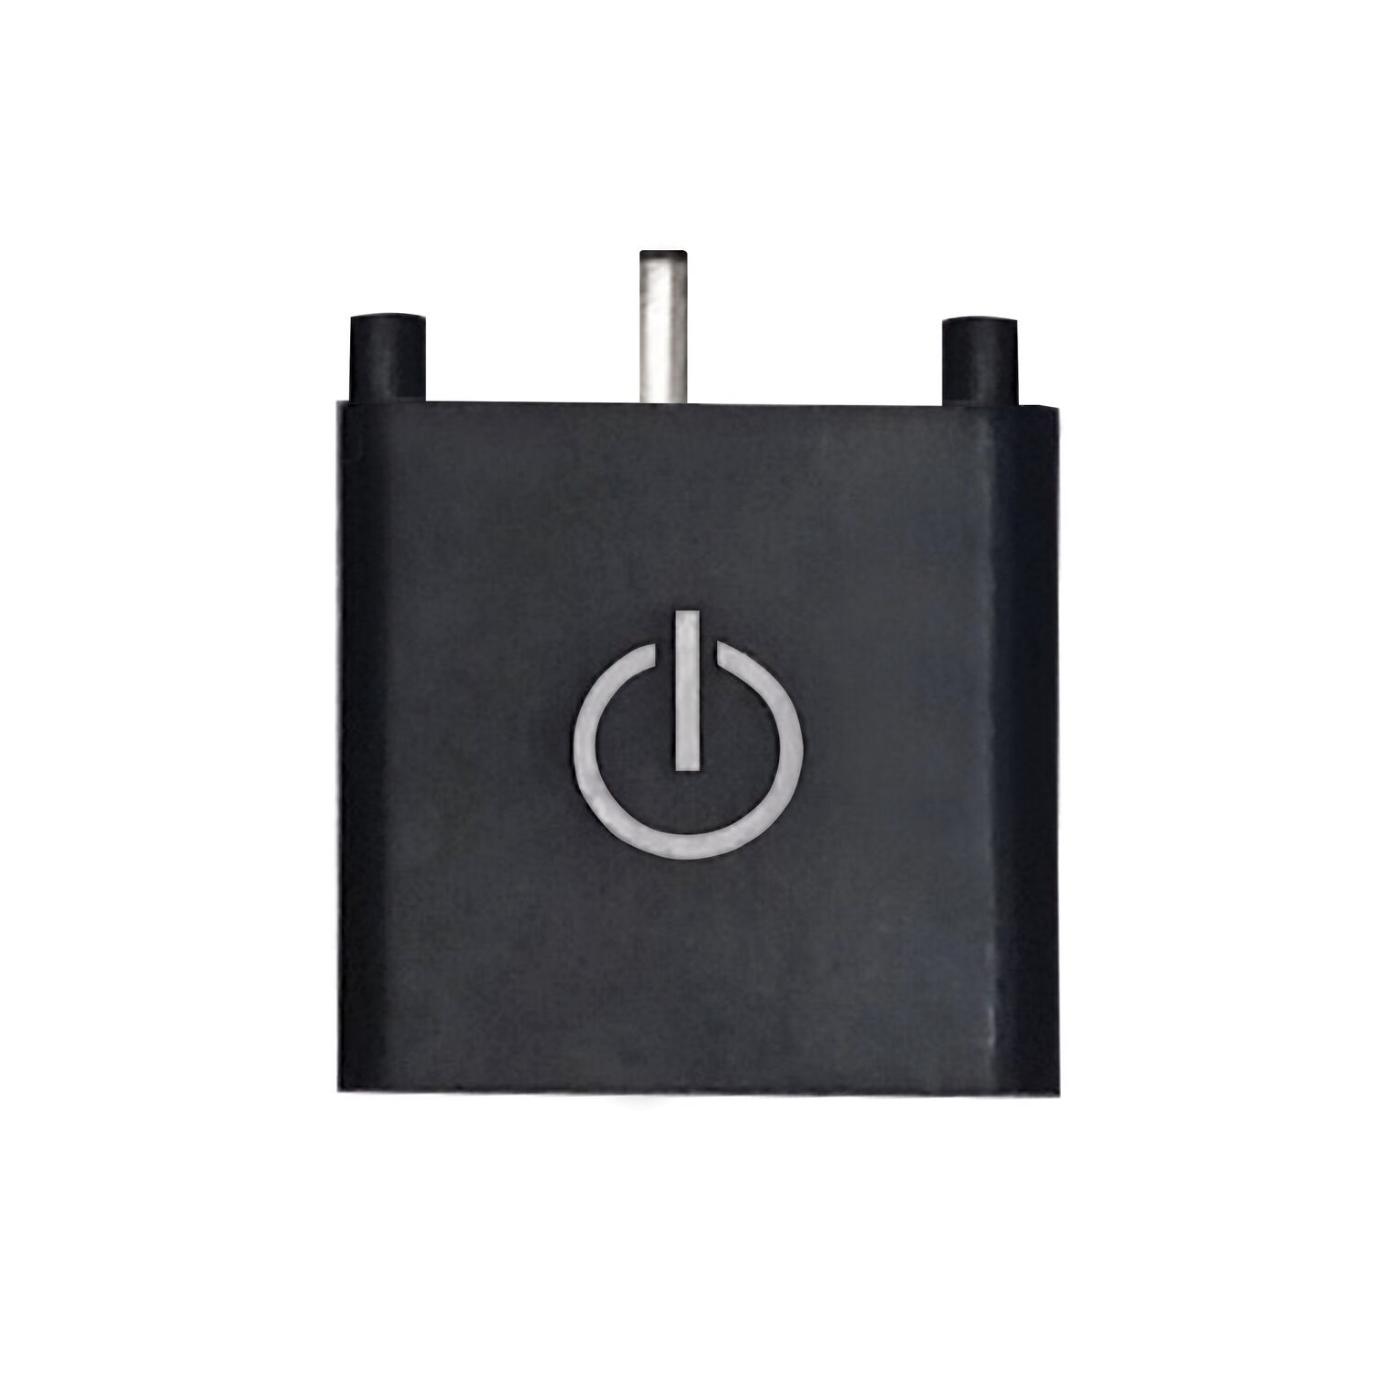 black led touch dimmer switch with upward facing metal prong and circular power symbol